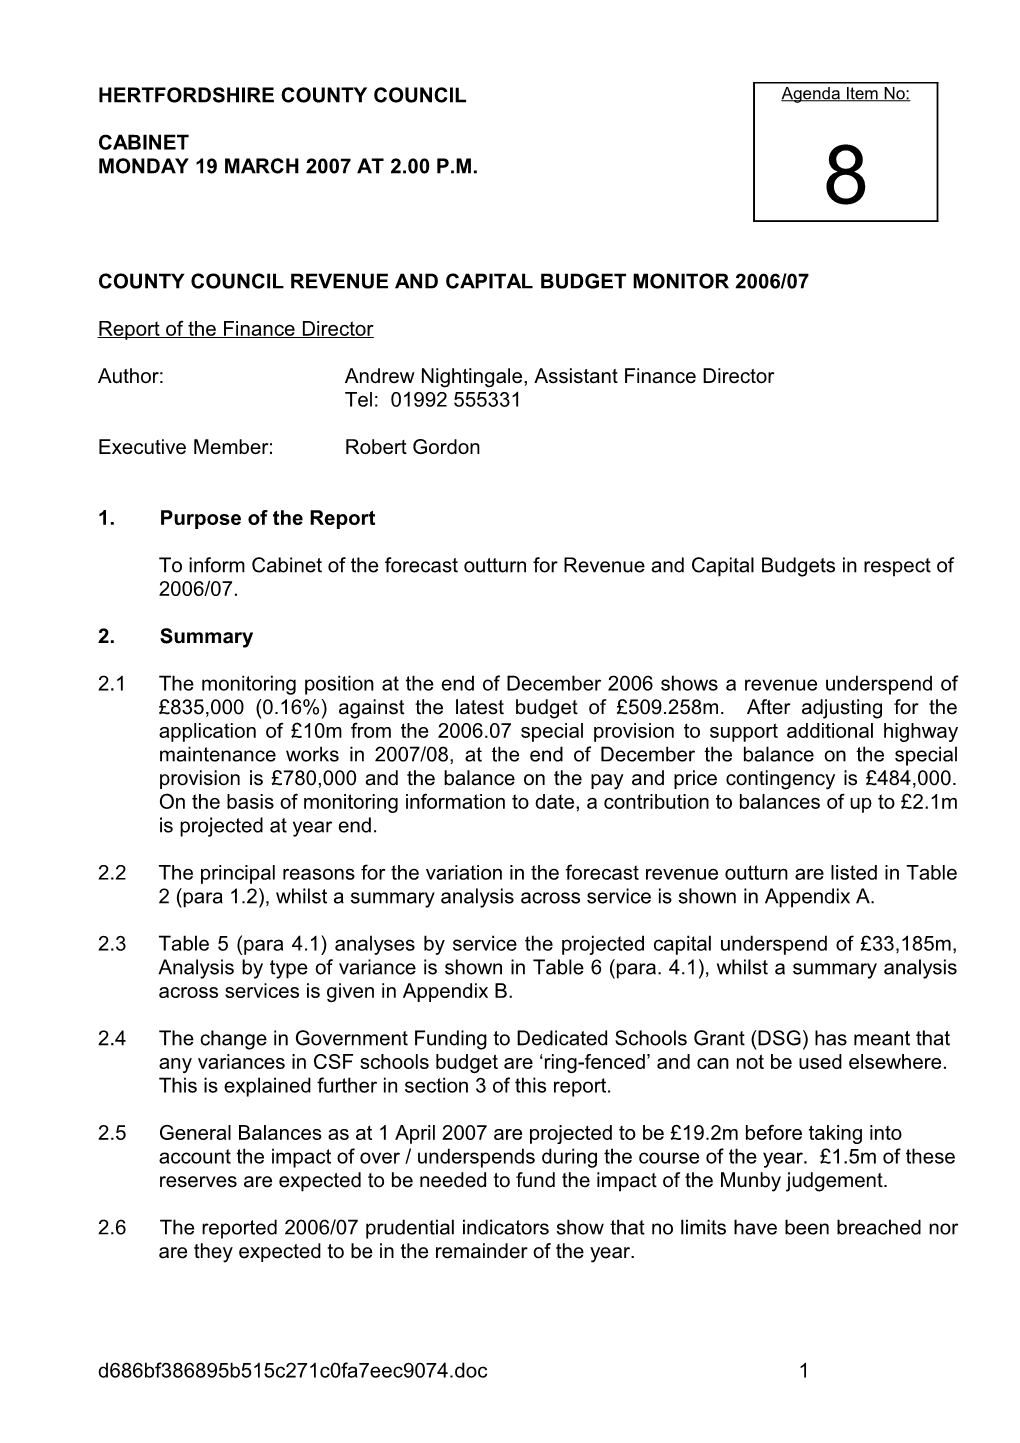 County Council Revenue and Capital Budget Monitor 2006/07